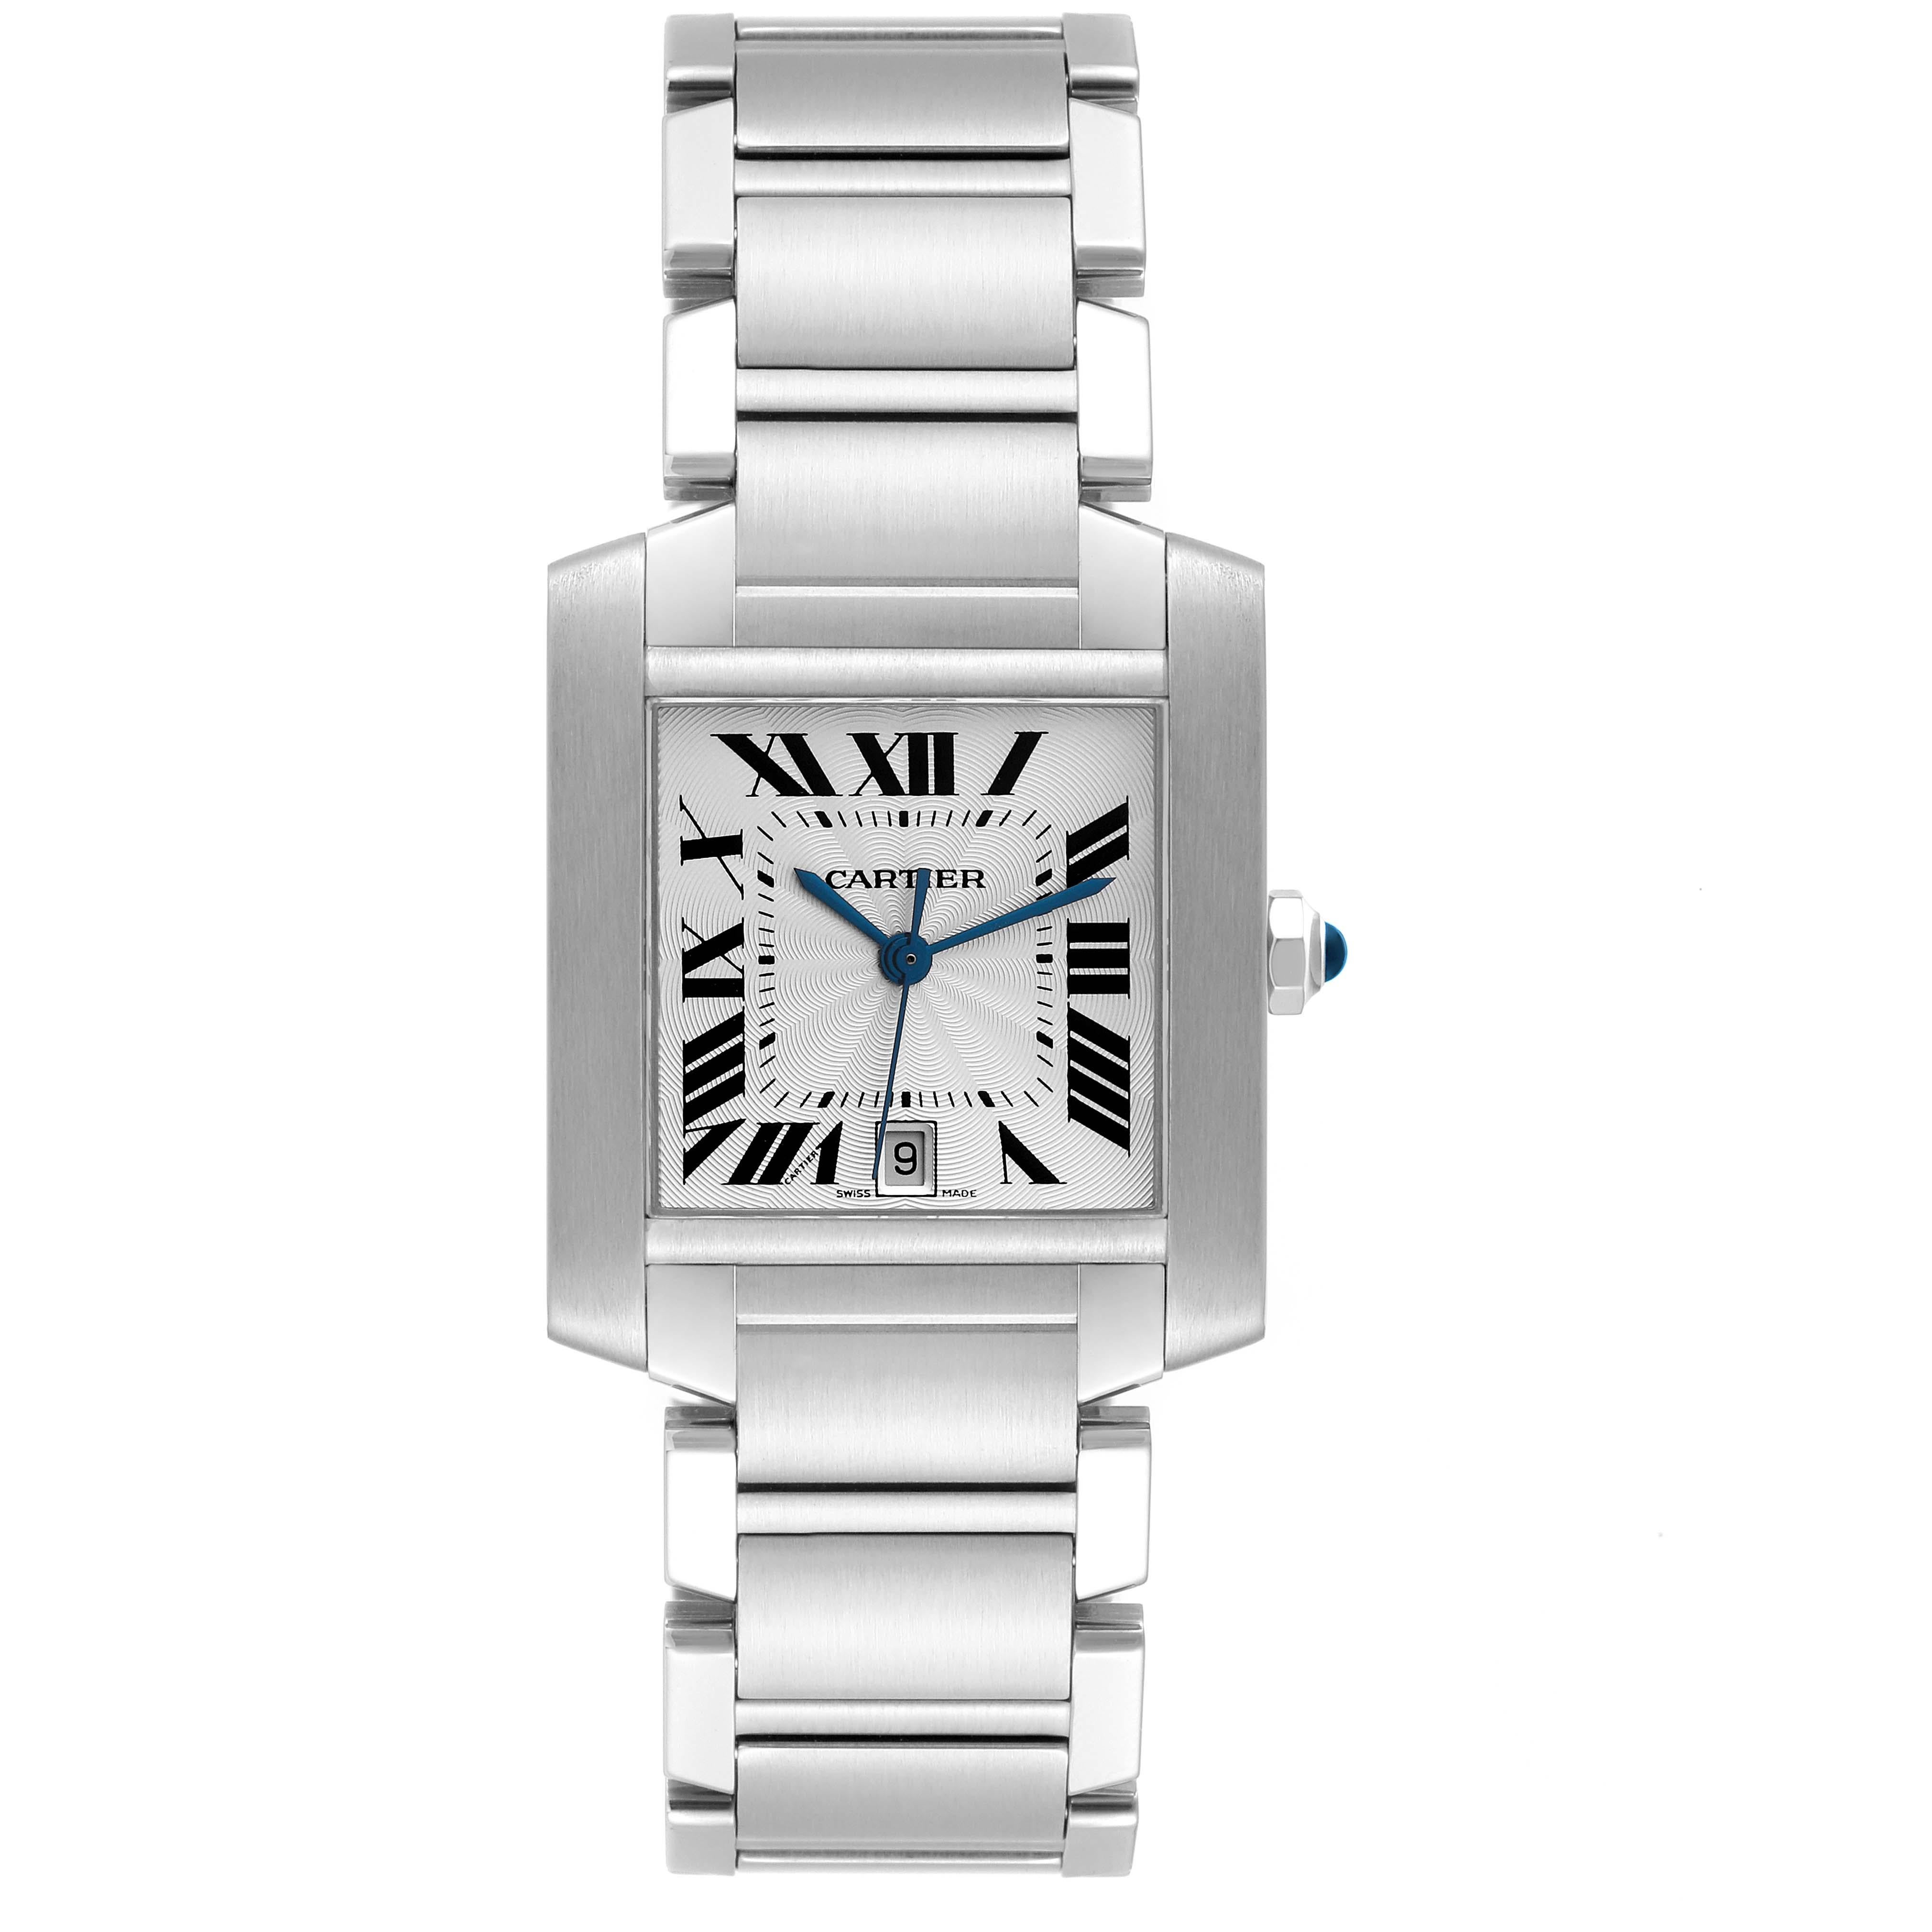 Cartier Tank Francaise Large Automatic Steel Mens Watch W51002Q3. Automatic self-winding movement. Rectangular stainless steel 28.0 x 32.0 mm case. Octagonal crown set with a blue spinel cabochon. . Scratch resistant sapphire crystal. Silver